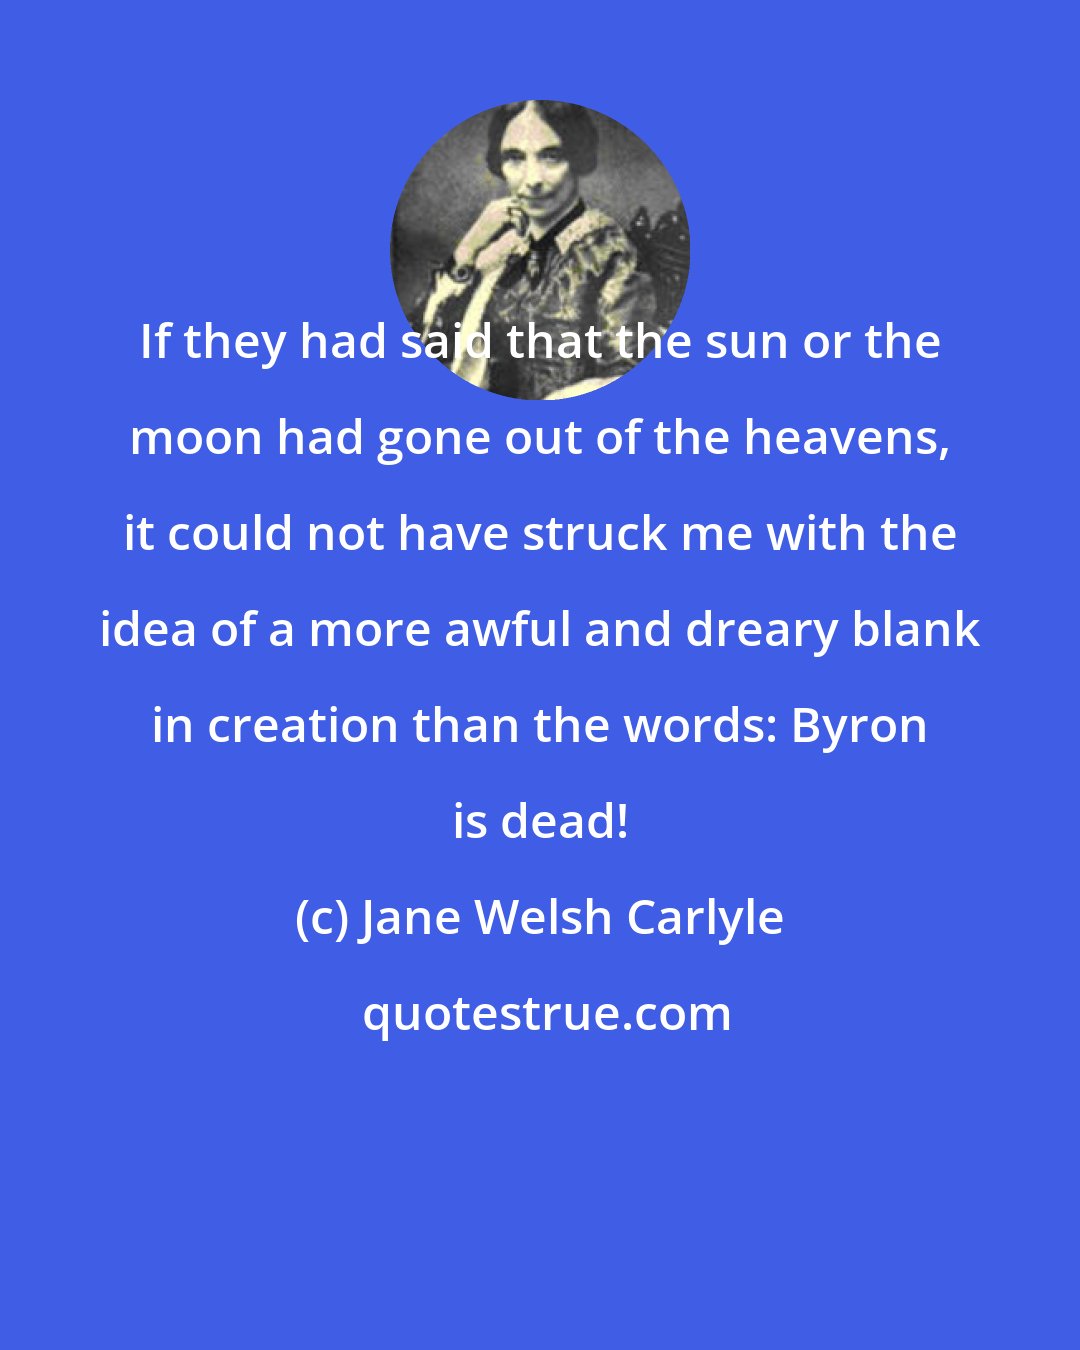 Jane Welsh Carlyle: If they had said that the sun or the moon had gone out of the heavens, it could not have struck me with the idea of a more awful and dreary blank in creation than the words: Byron is dead!